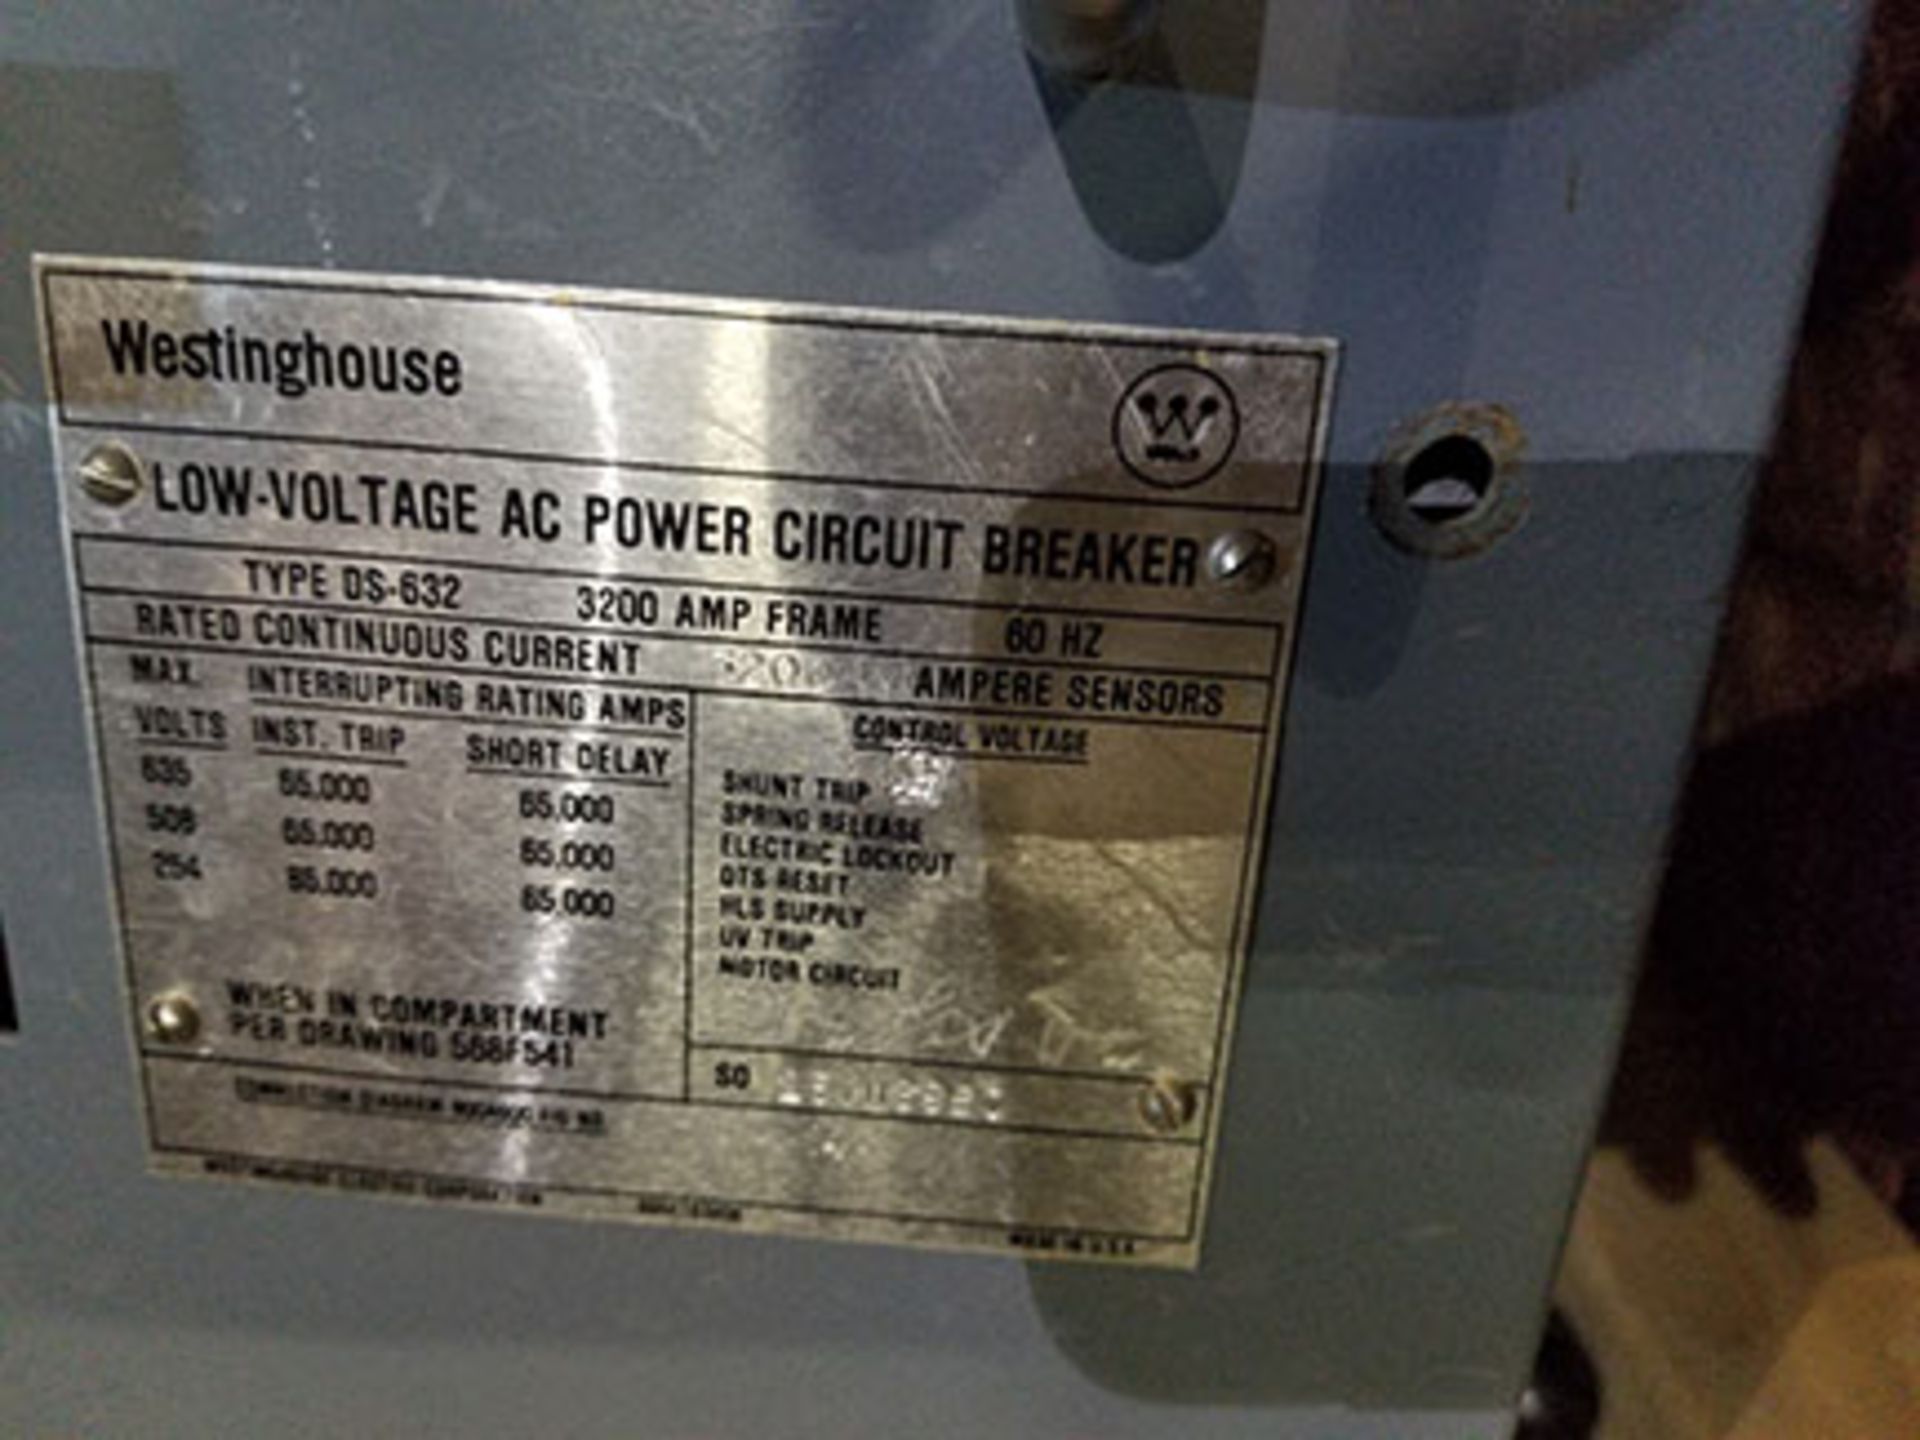 WESTINGHOUSE LOW-VOLTAGE AC POWER CIRCUIT BREAKER, TYPE DS-632, 3,200 AMP FRAME, 60HZ, CONT. - Image 4 of 5